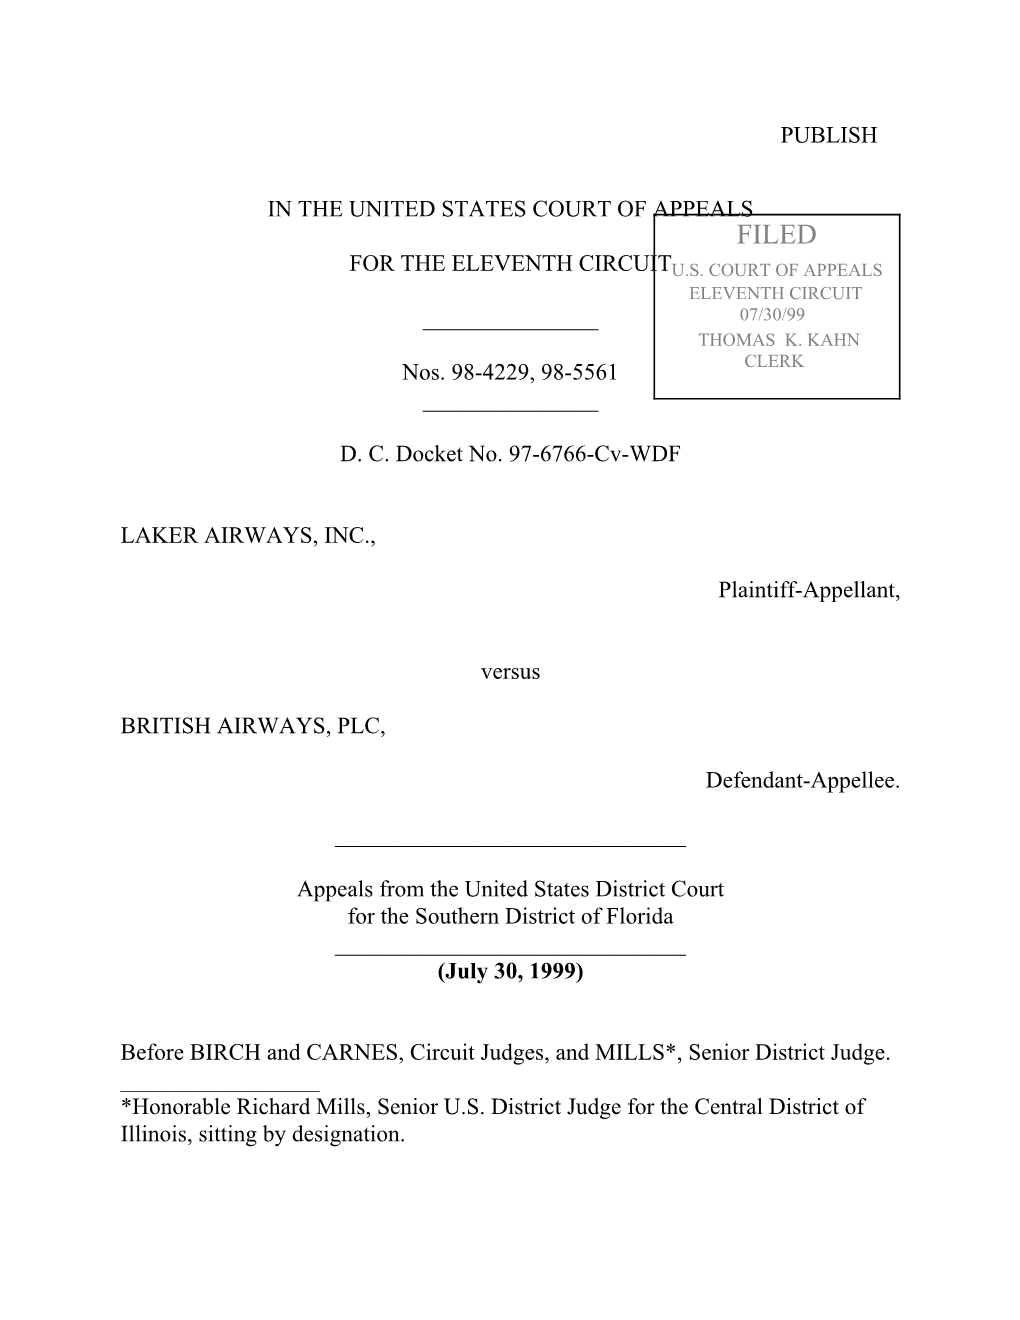 Filed for the Eleventh Circuit U.S